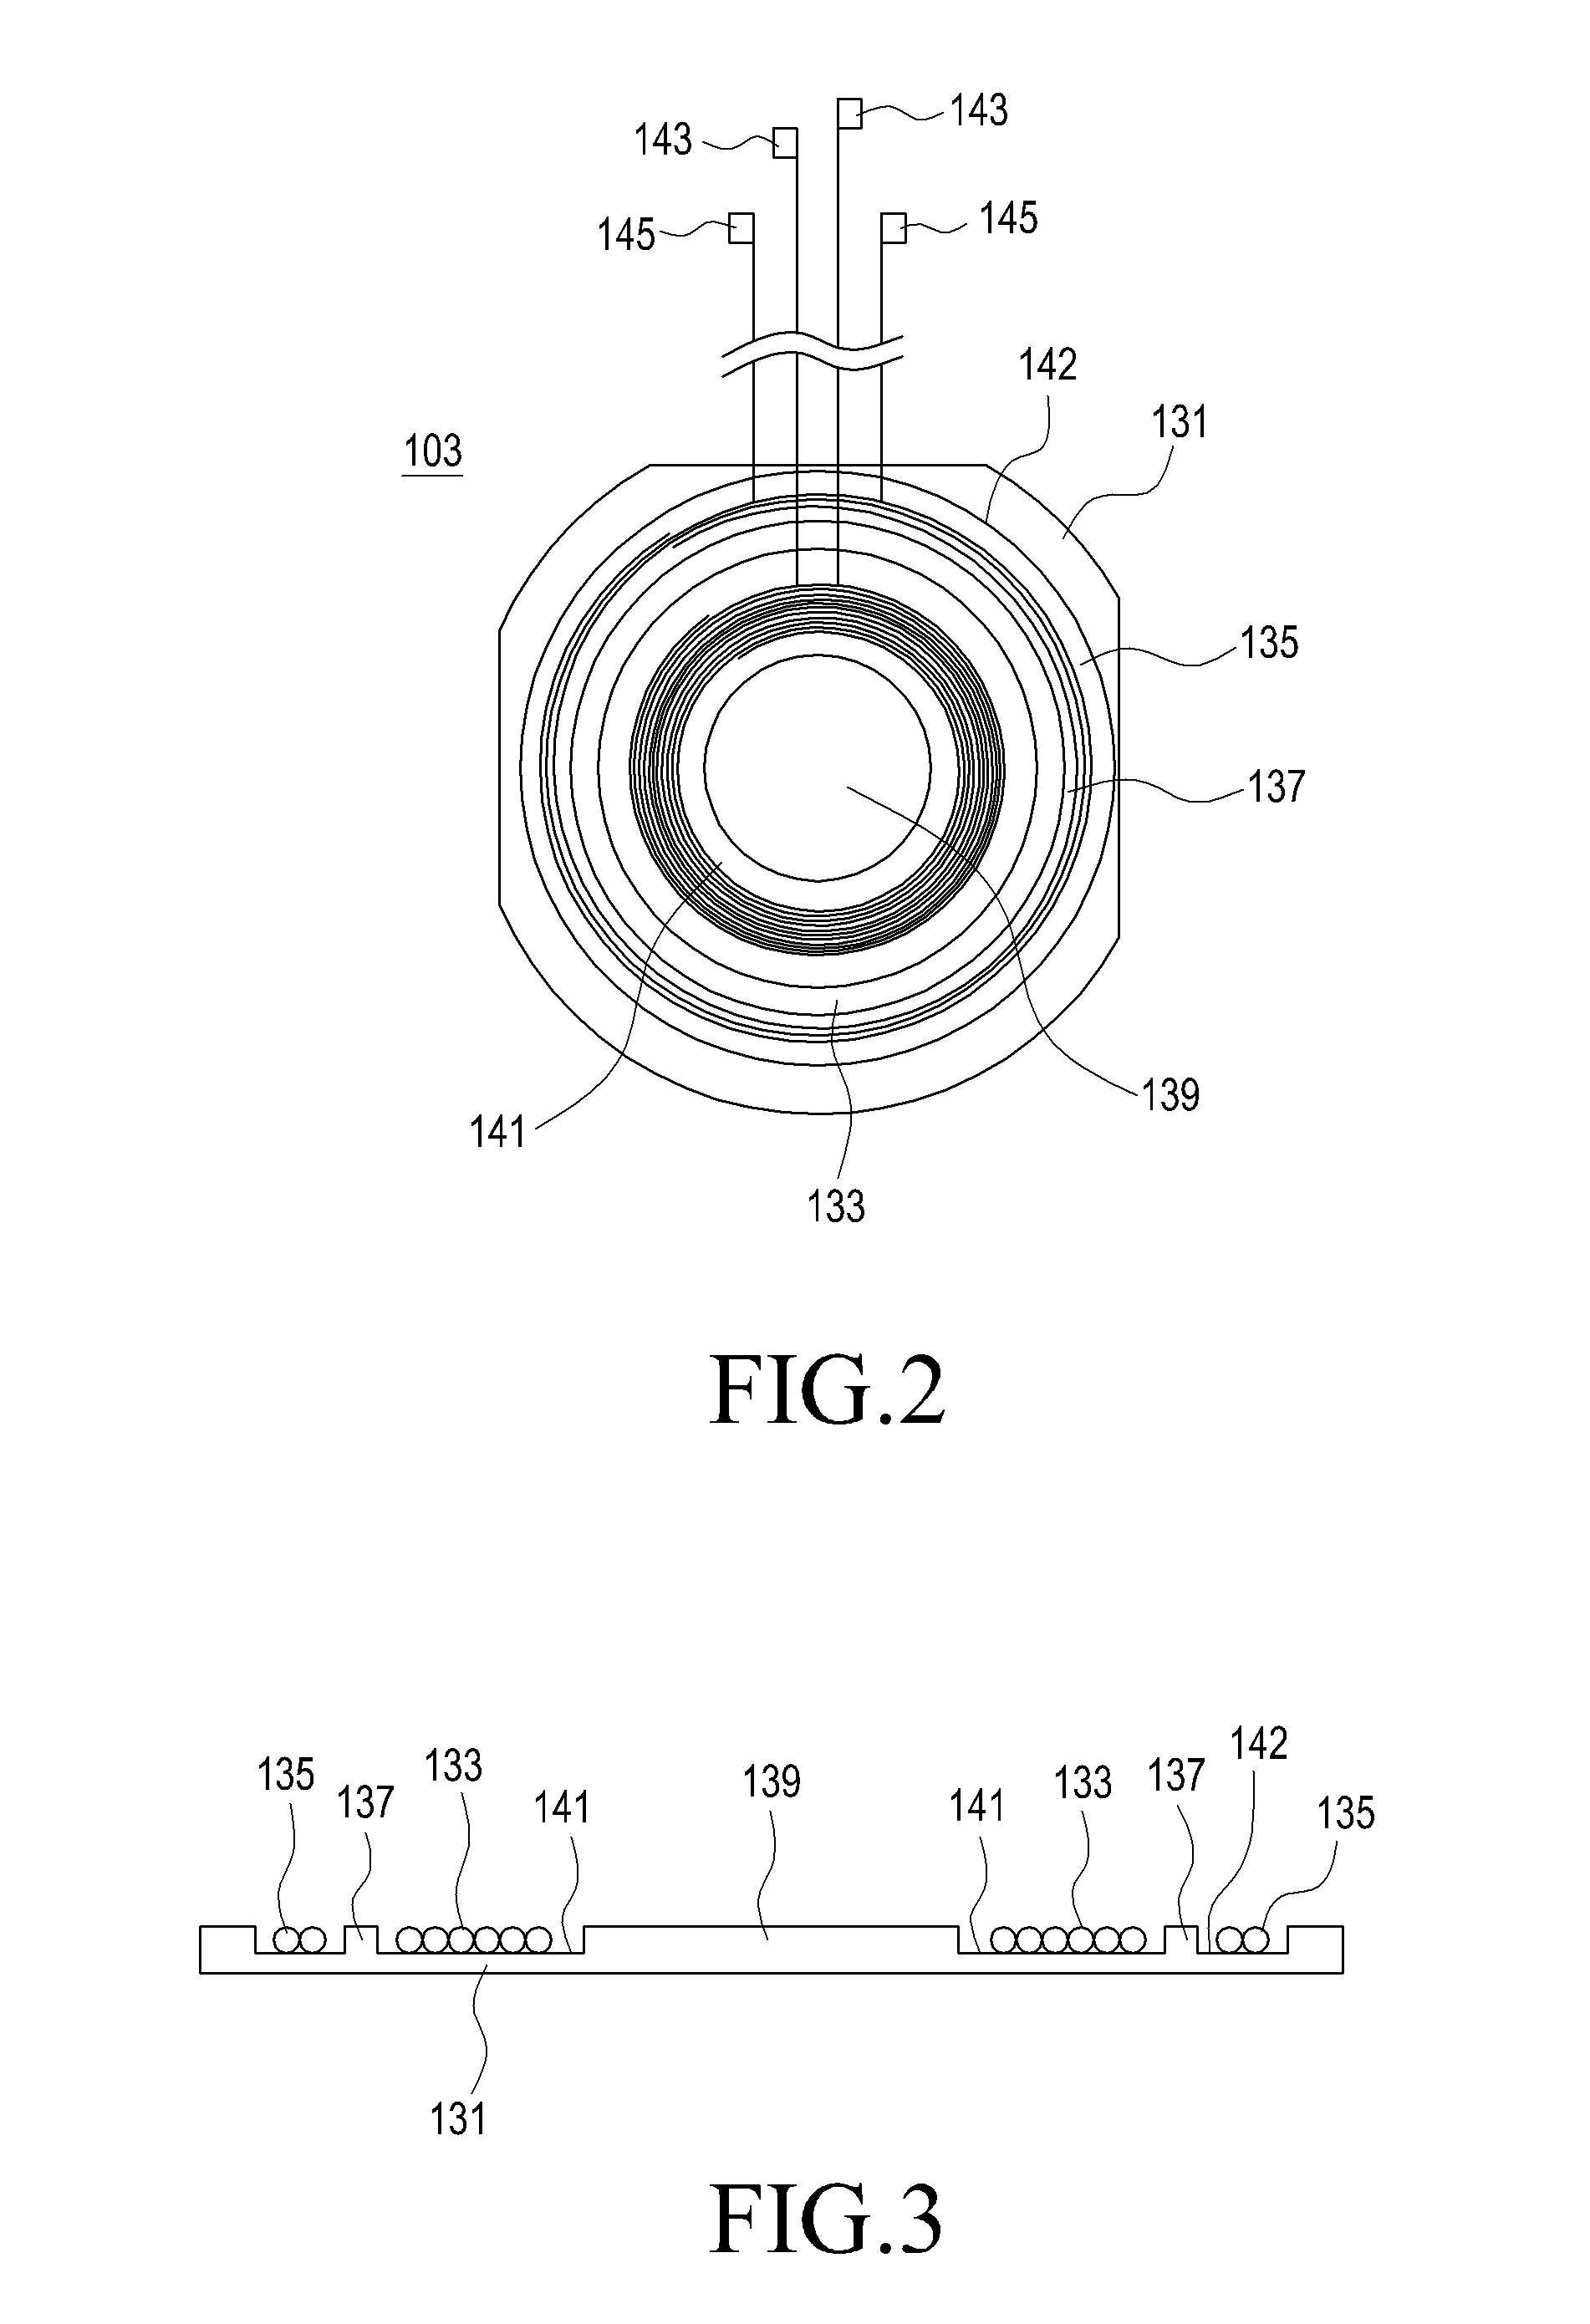 Portable terminal having a wireless charger coil and an antenna element on the same plane